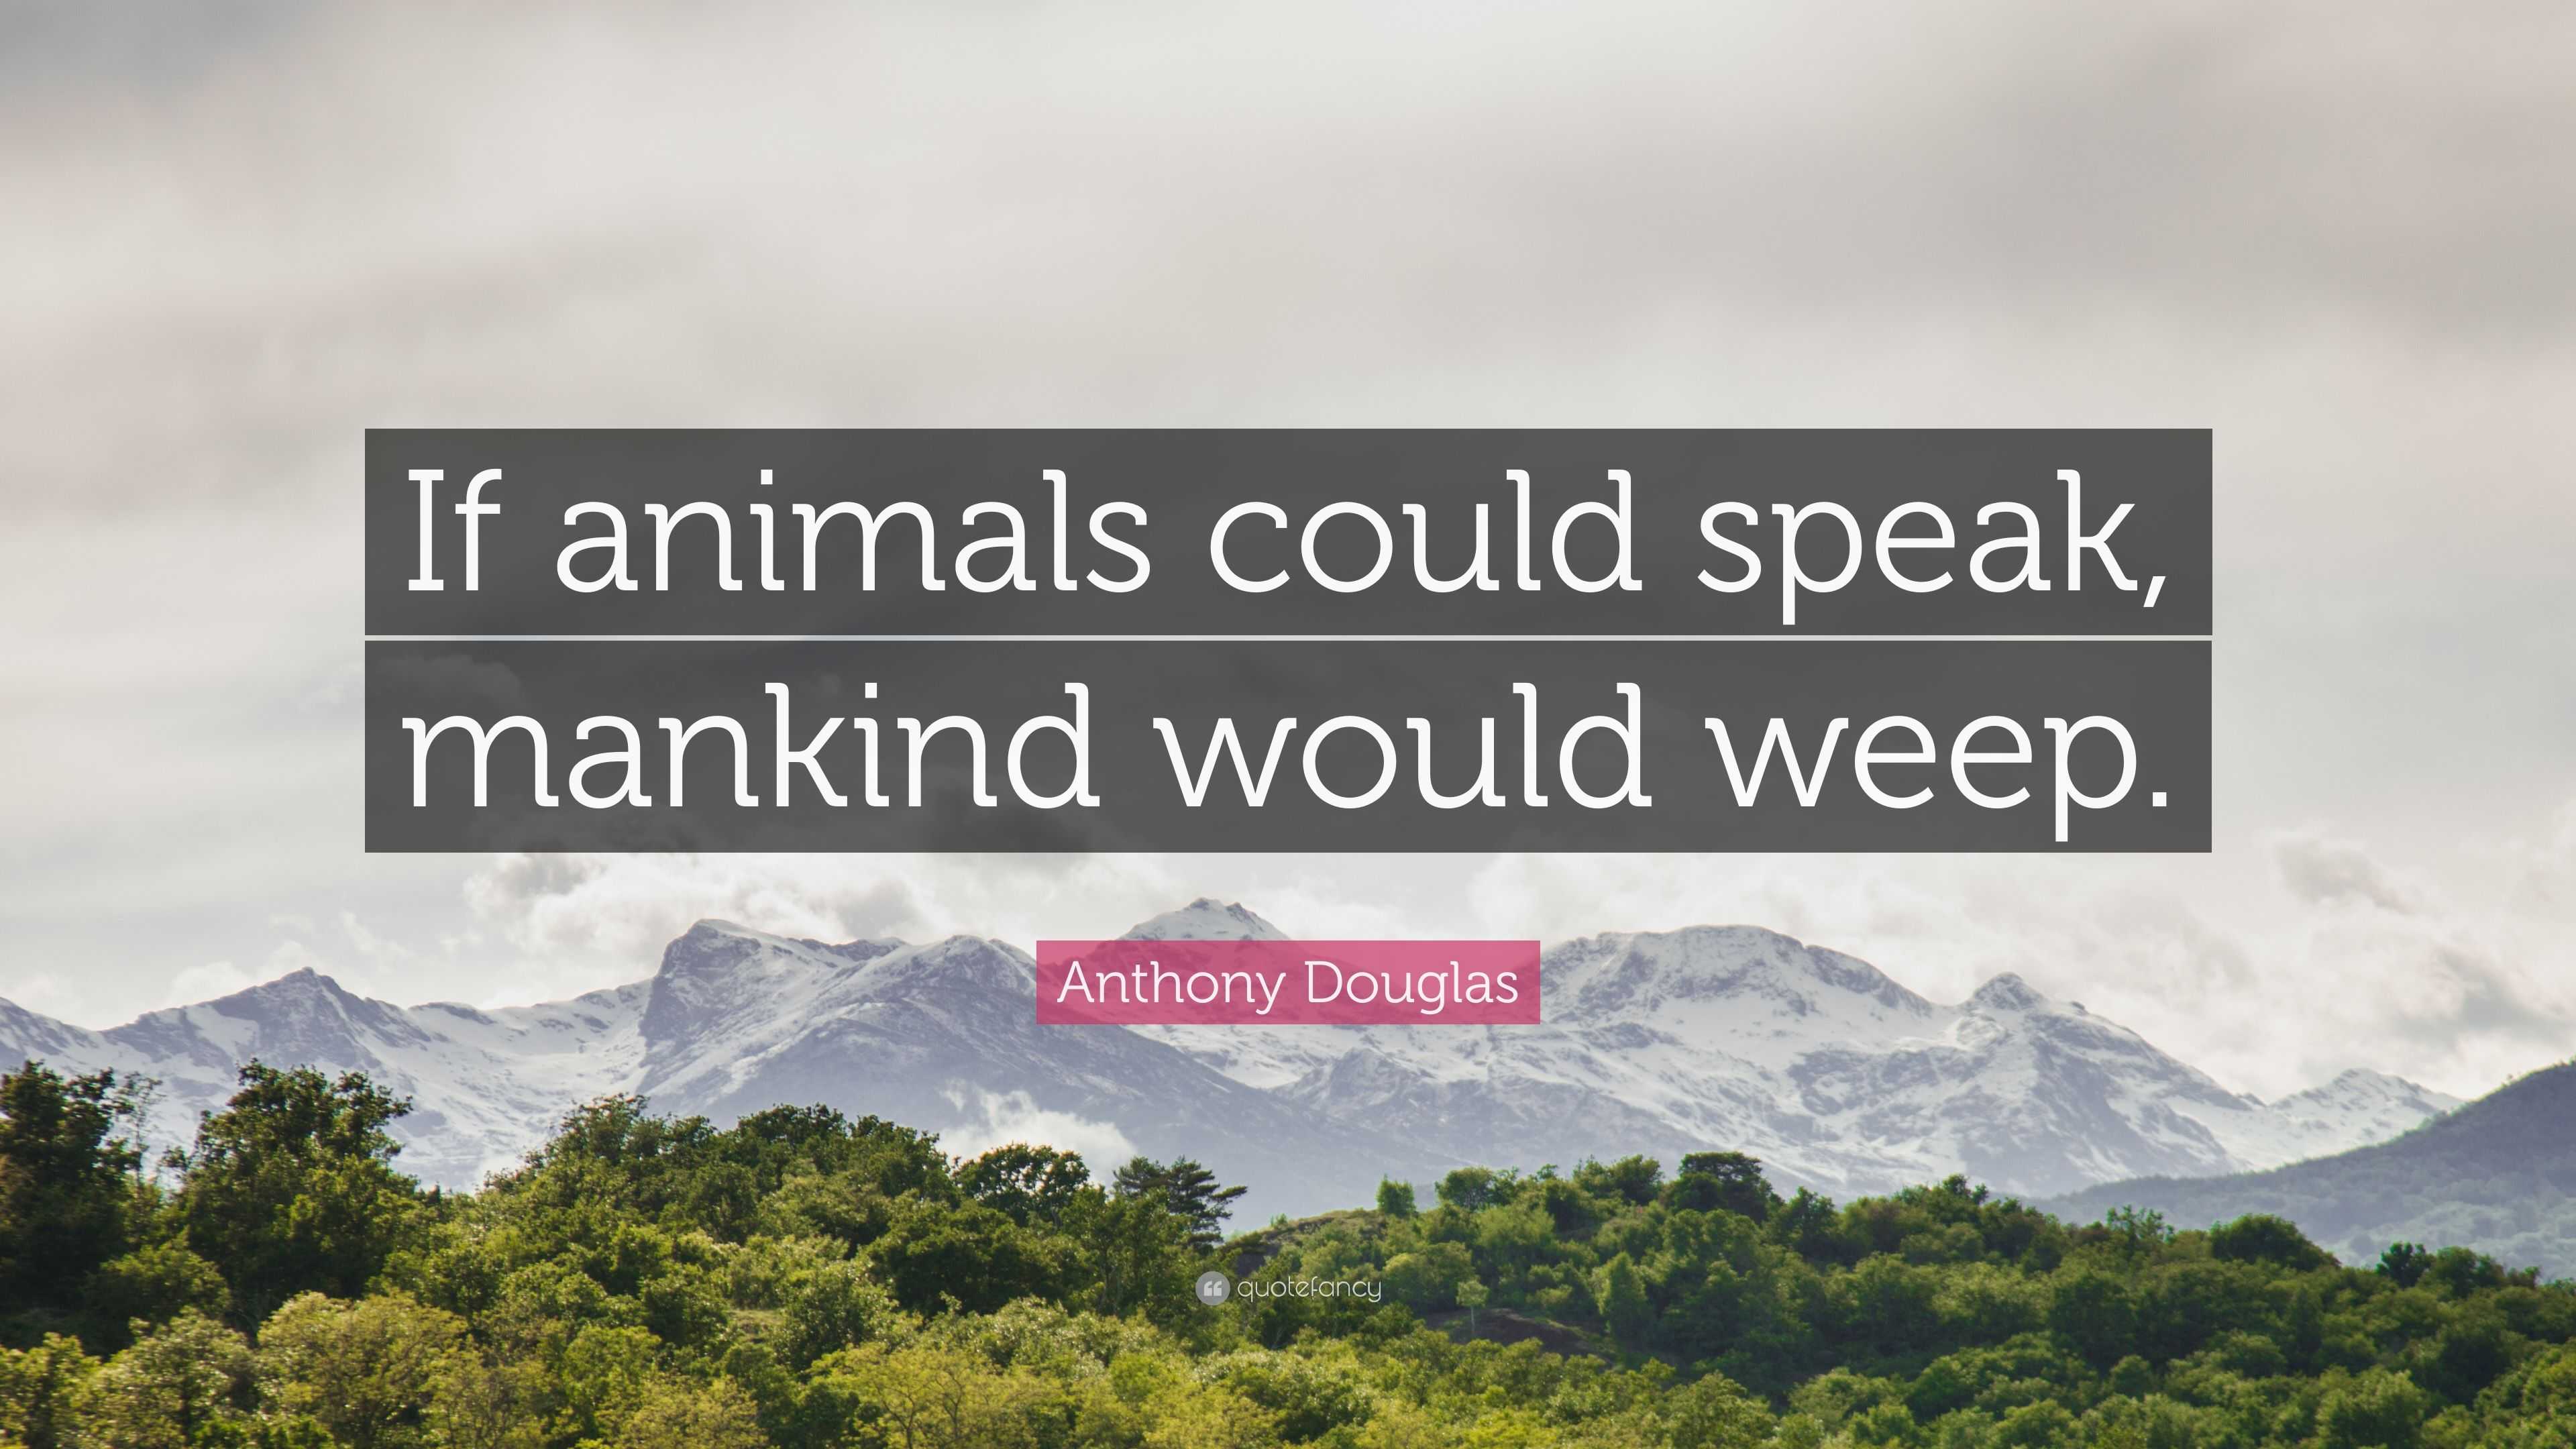 Anthony Douglas Quote: “If animals could speak, mankind would weep.”